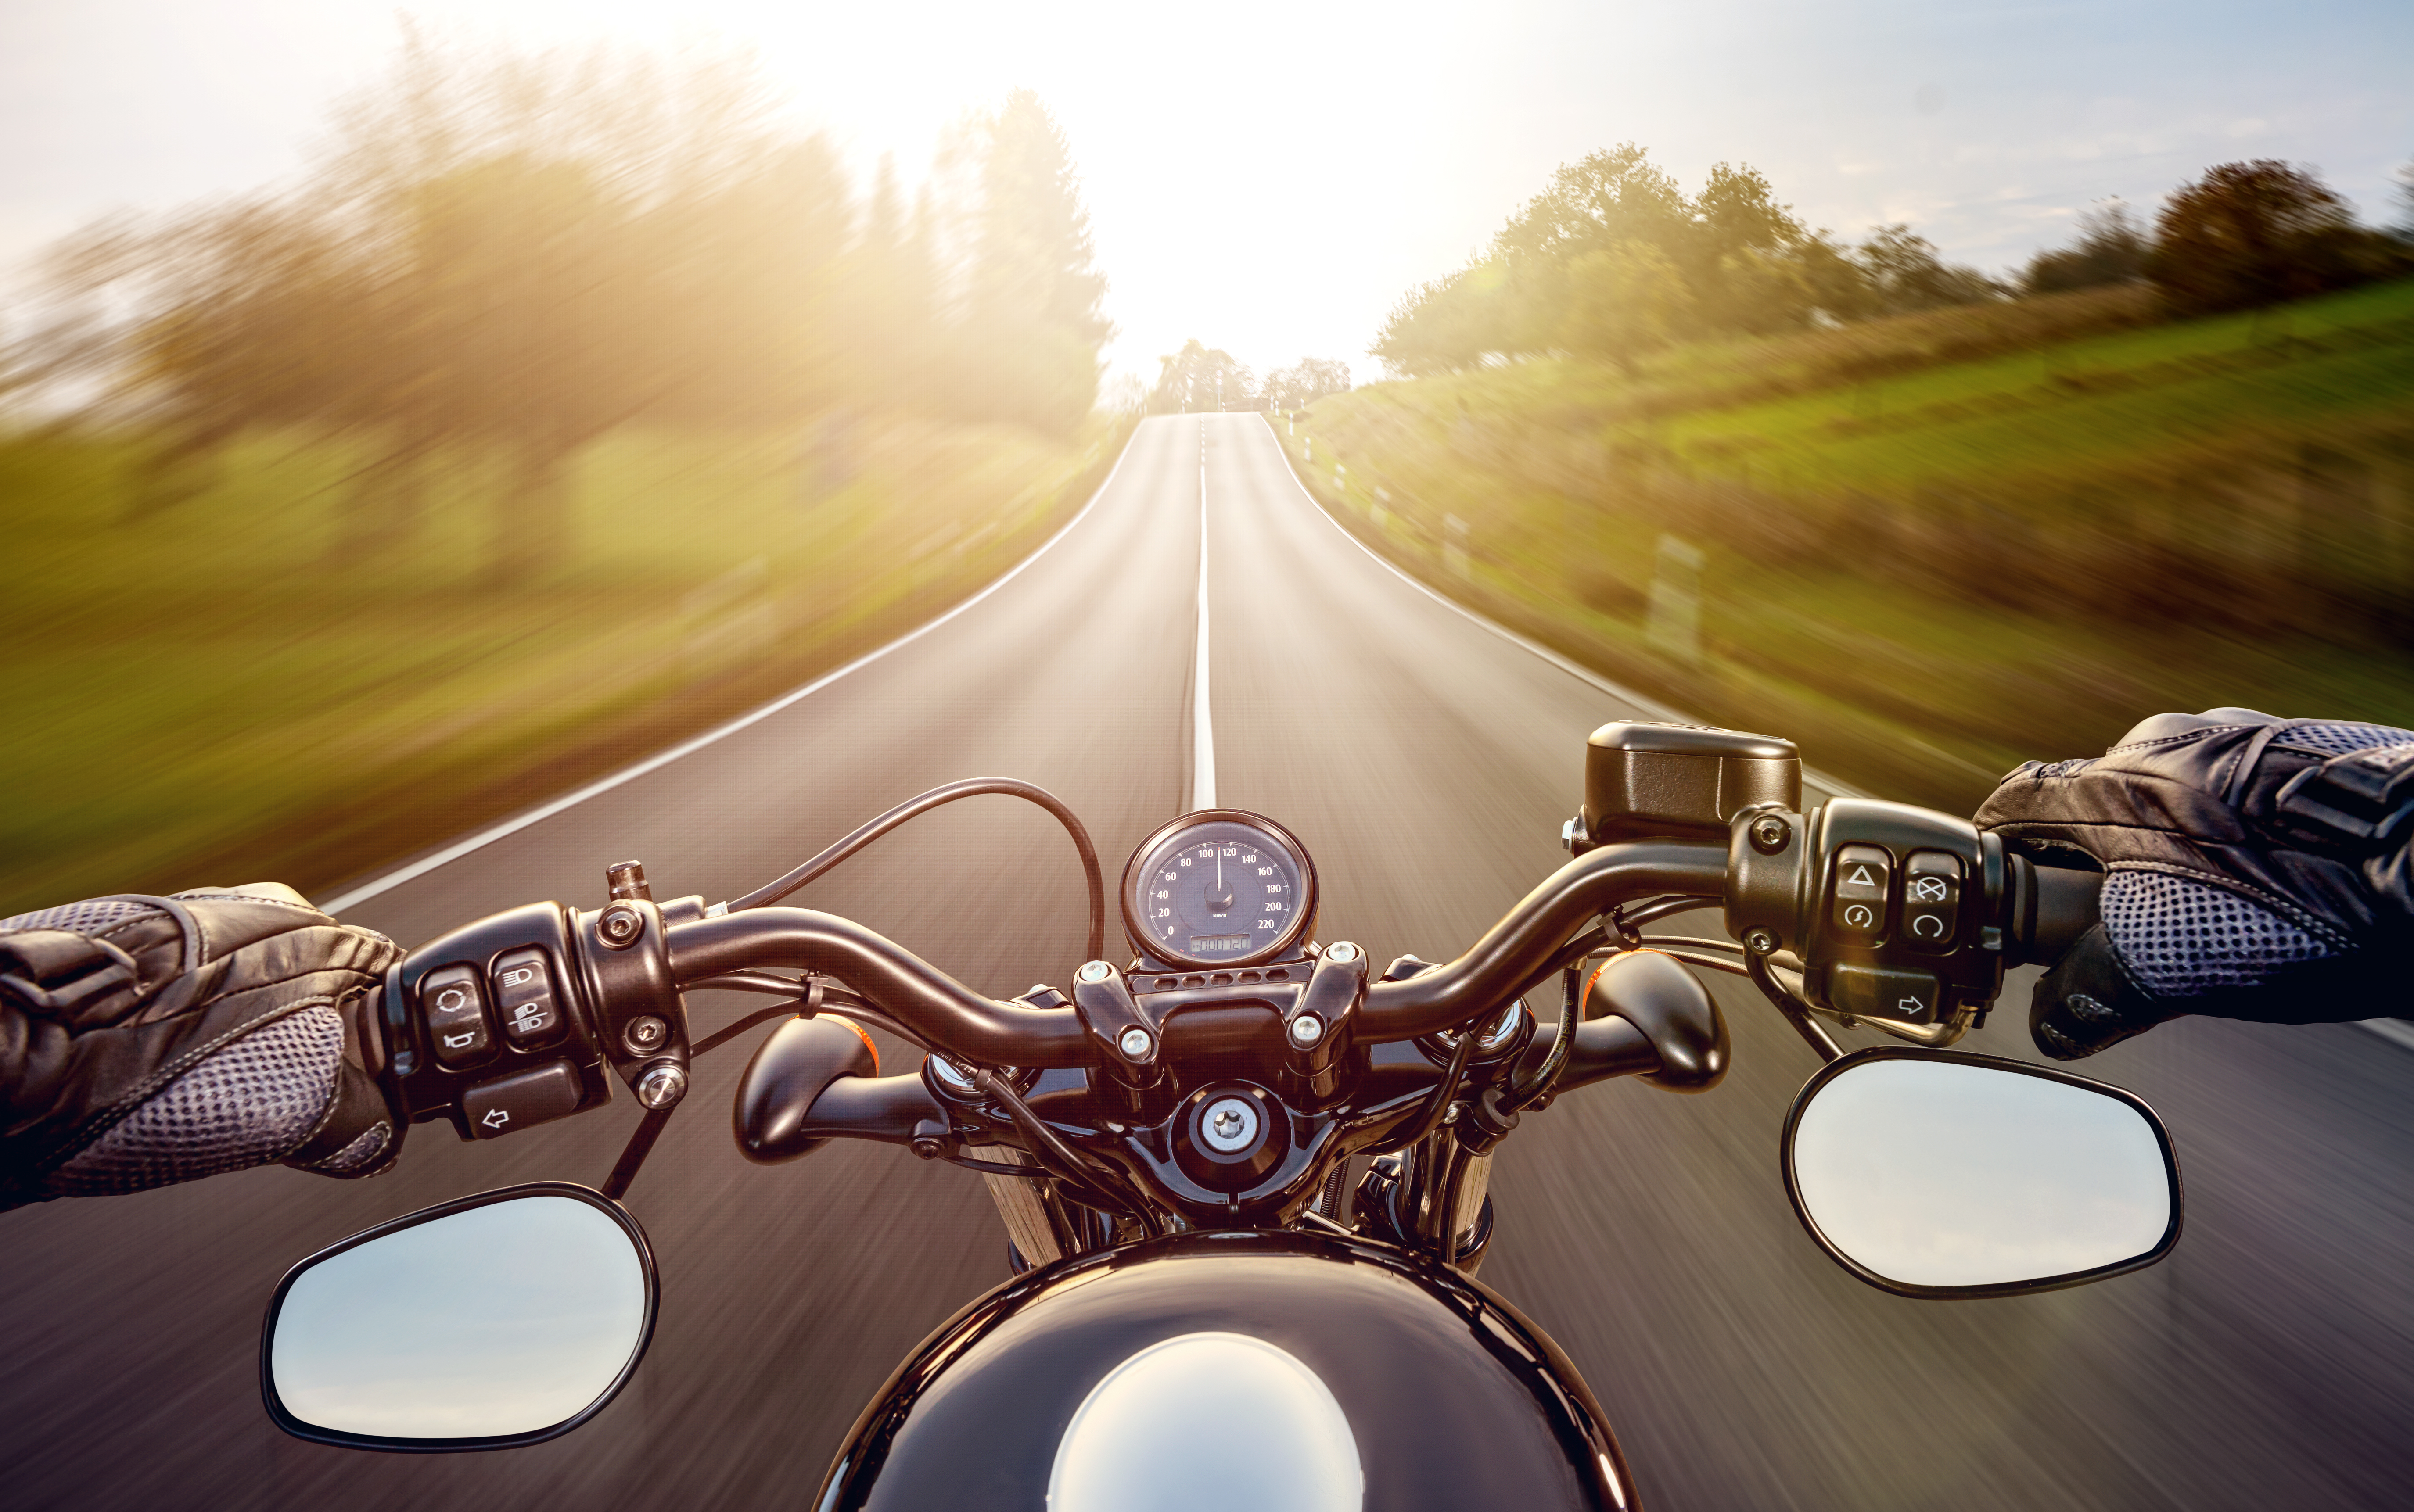 Michigan Motorcycle Laws What You Need to Know